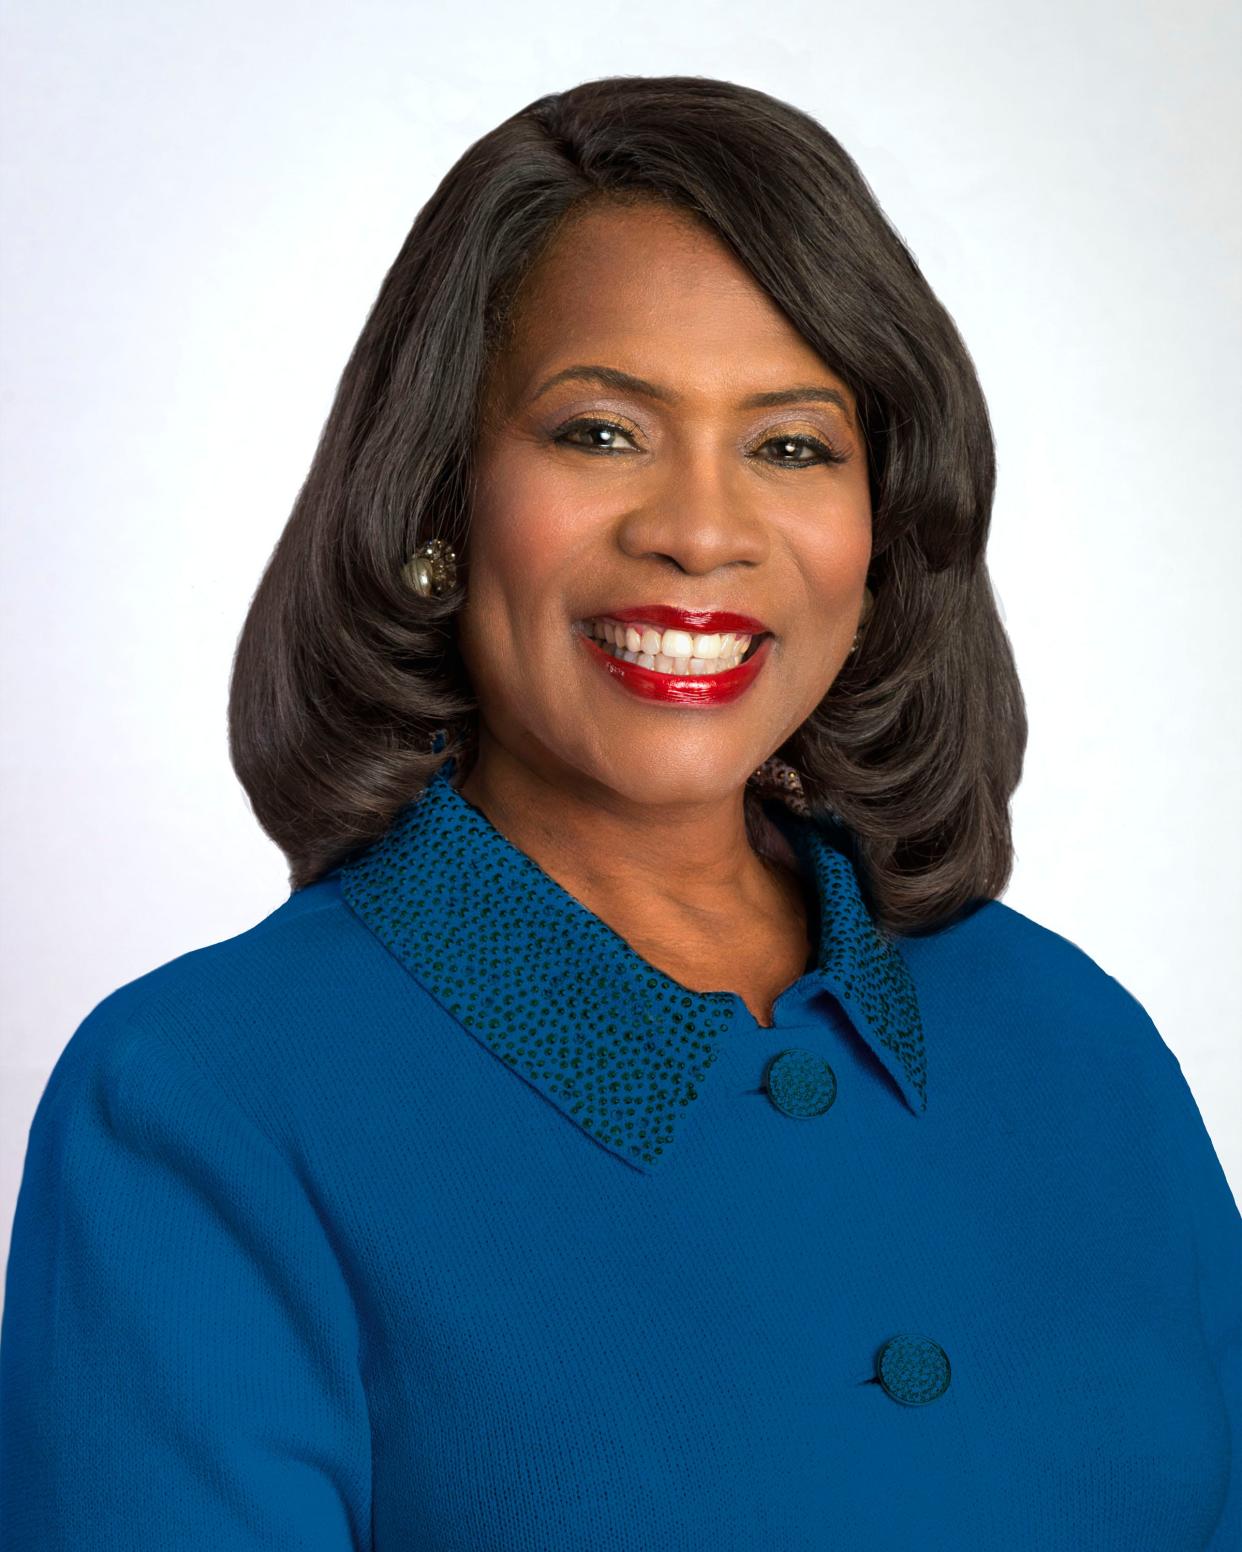 Under the leadership of president Glenda Glover, Tennessee State University has experienced significant increases in enrollment, fundraising and academic offerings.